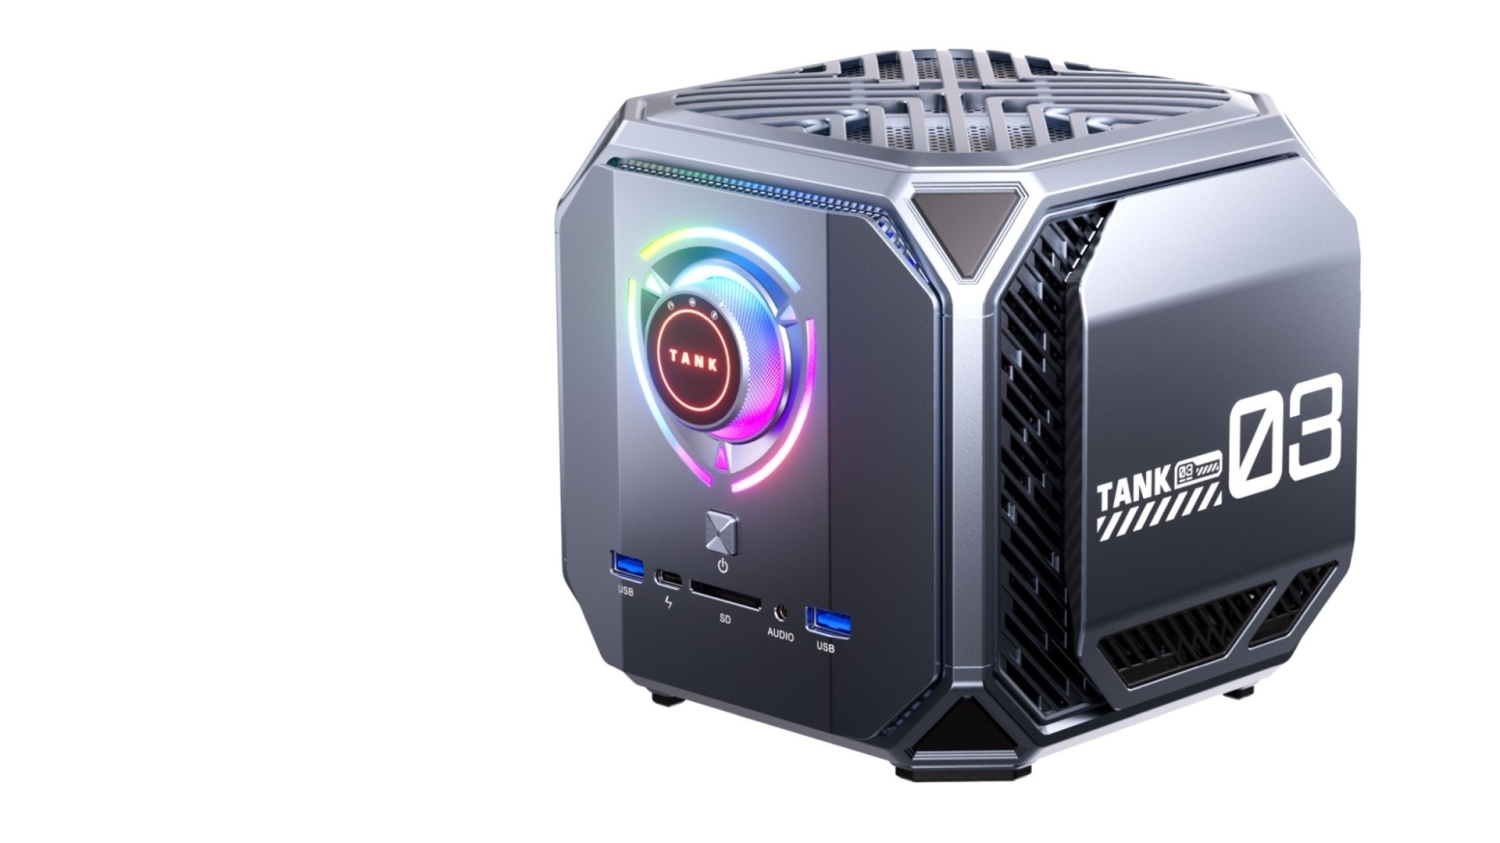 AceMagic Tank 03 is a mini PC with GeForce RTX 3080 mobile graphics and a  funky boombox design